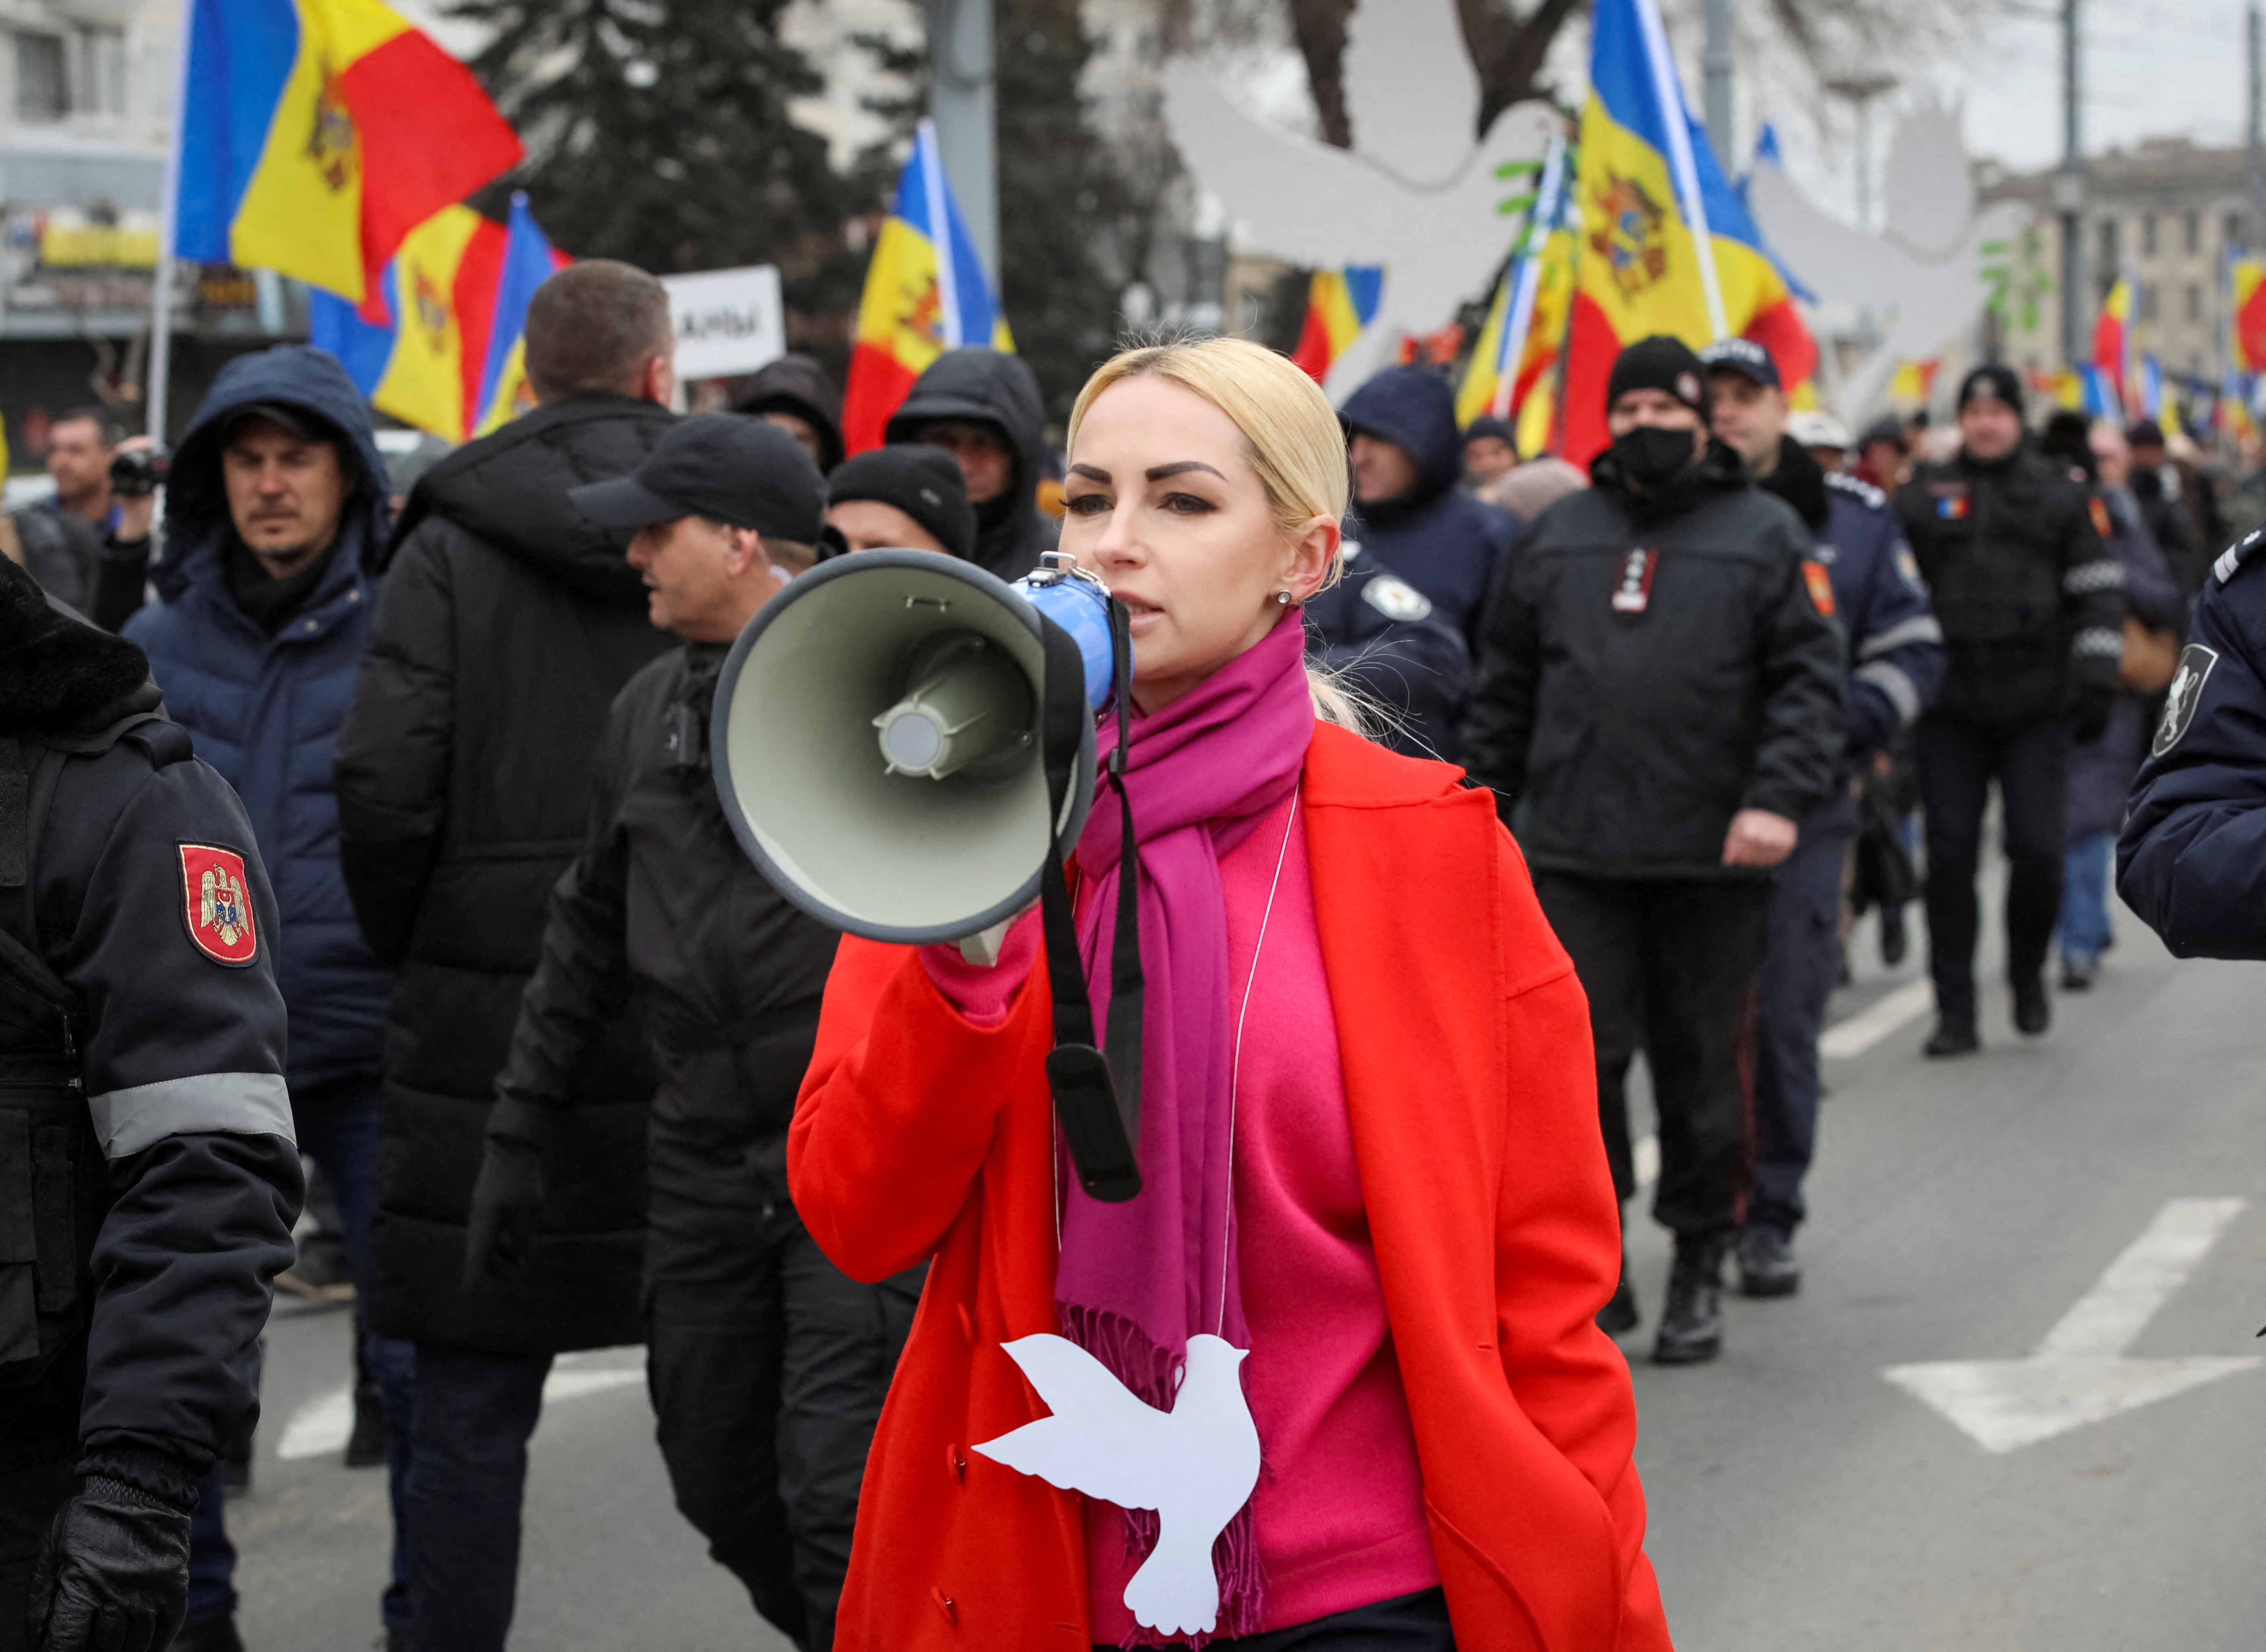 Opposition protest leader detained in Moldova | Reuters